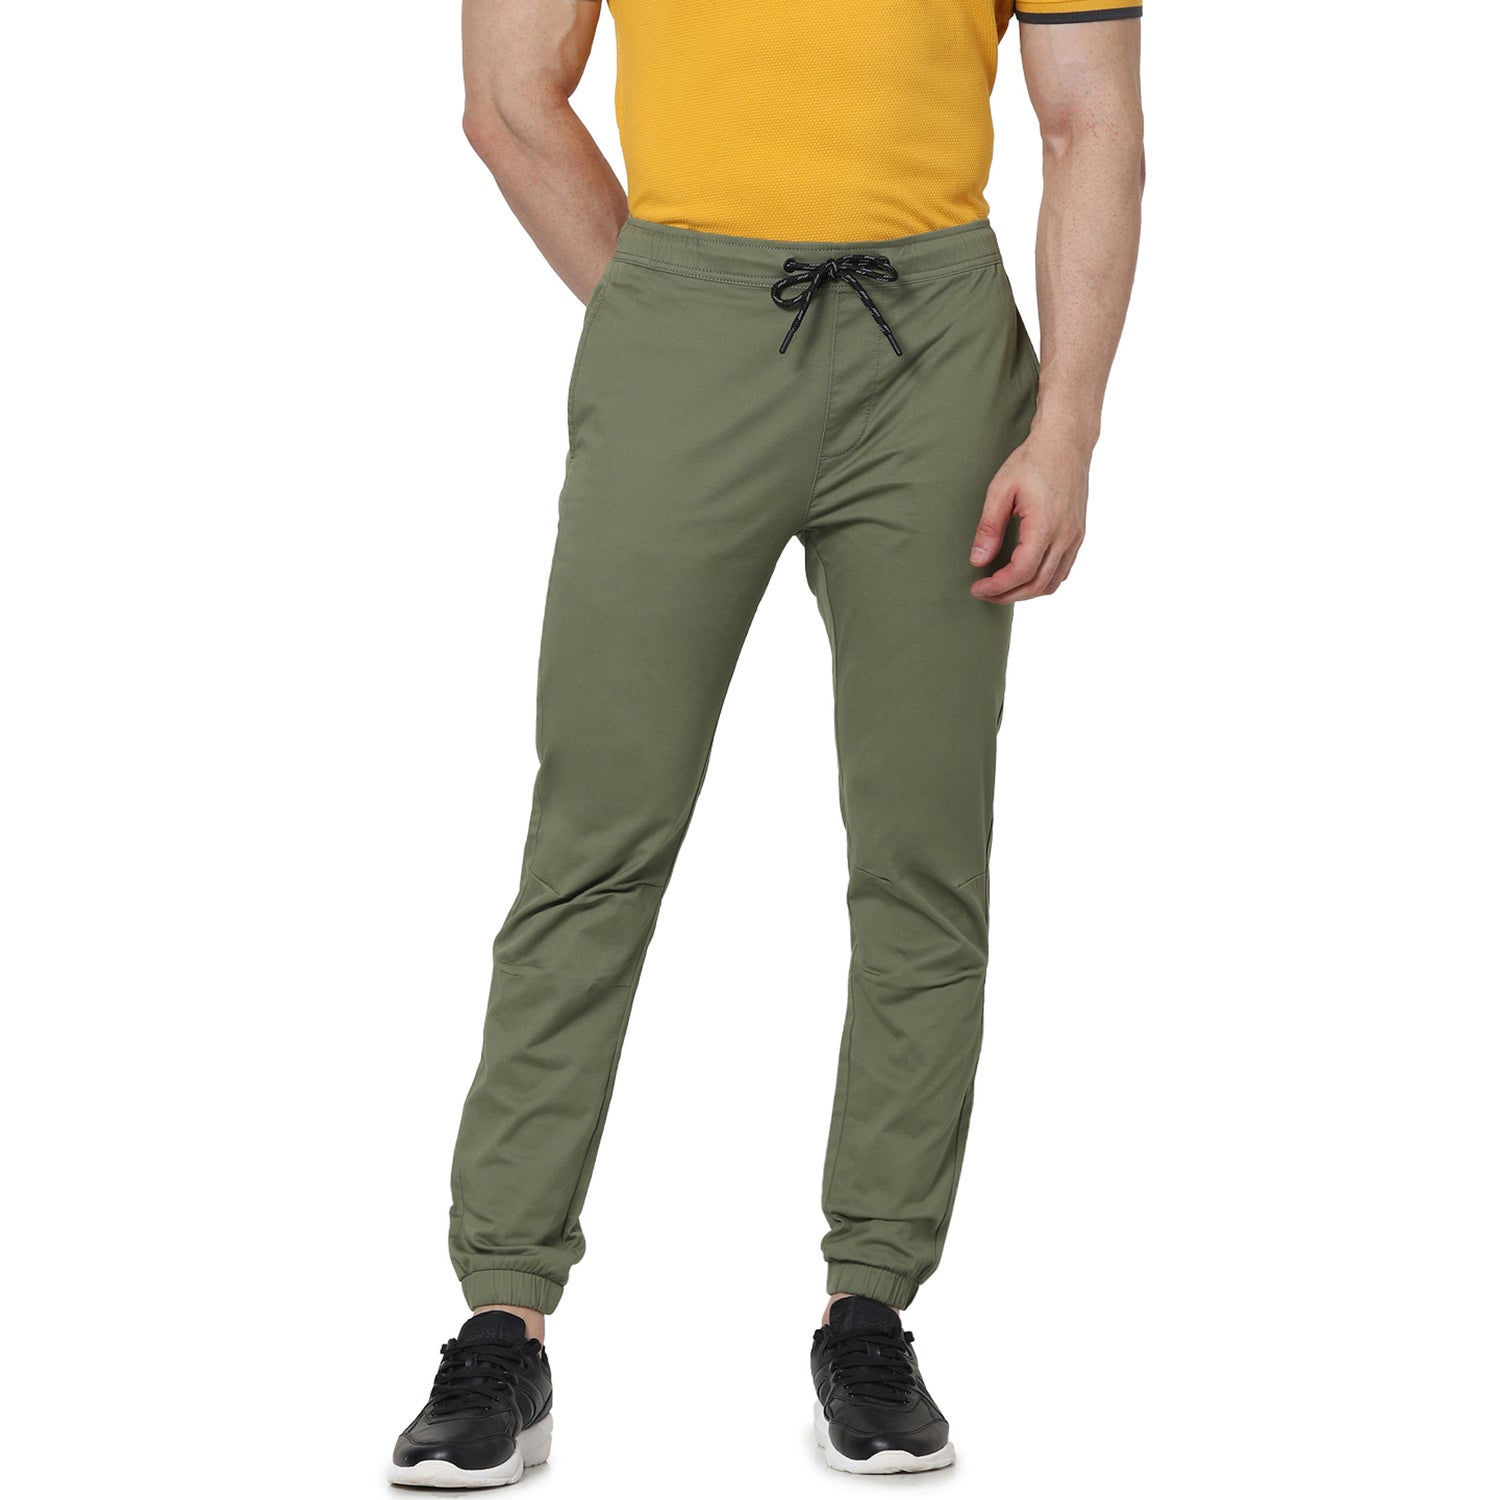 Olive Green Straight Fit Joggers Trousers (TOBASIC)